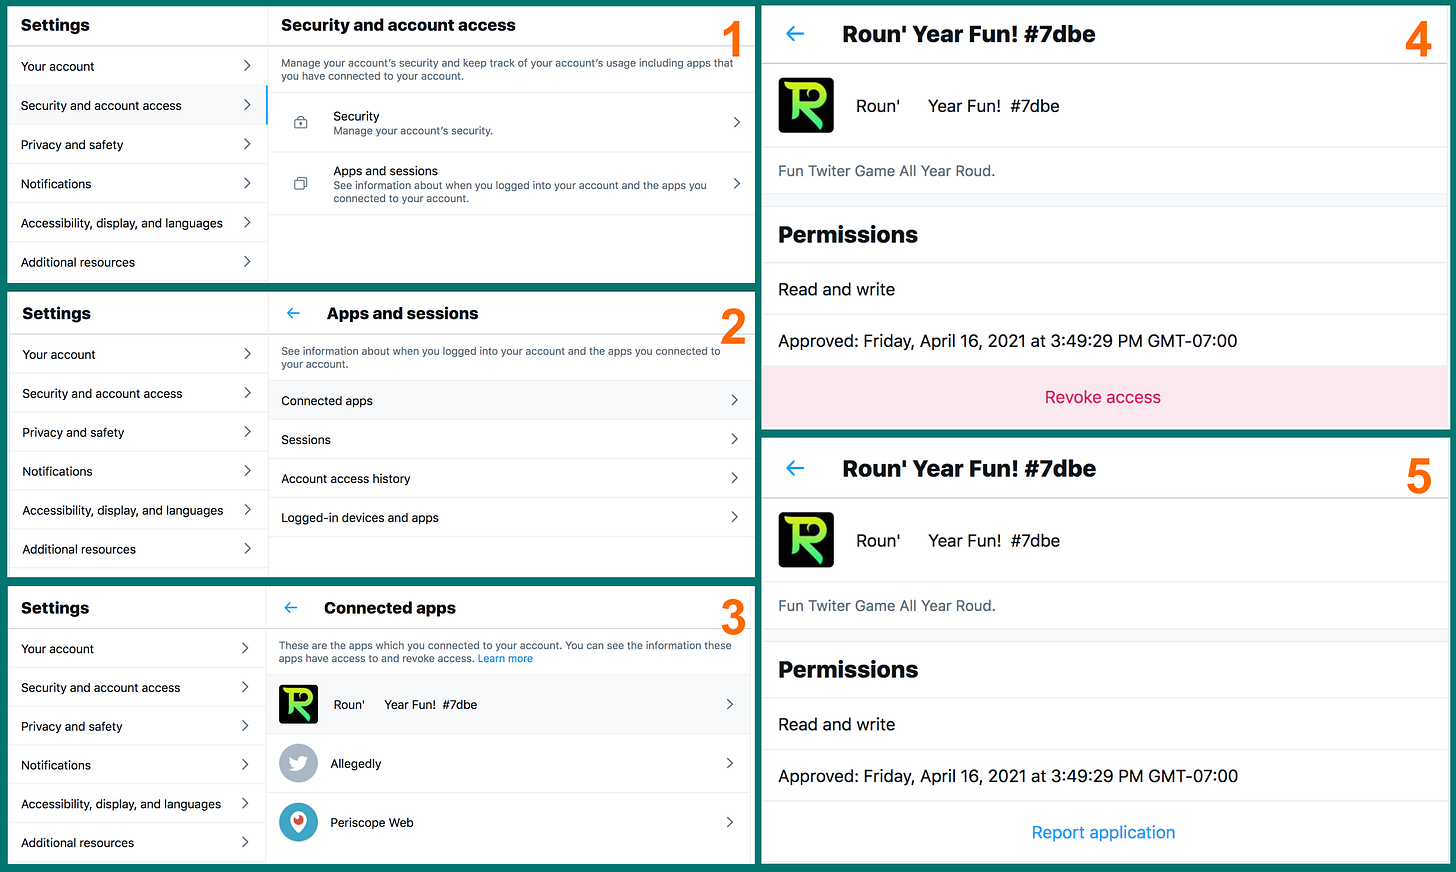 collage of screenshots showing the process of revoking Round Year Fun's access